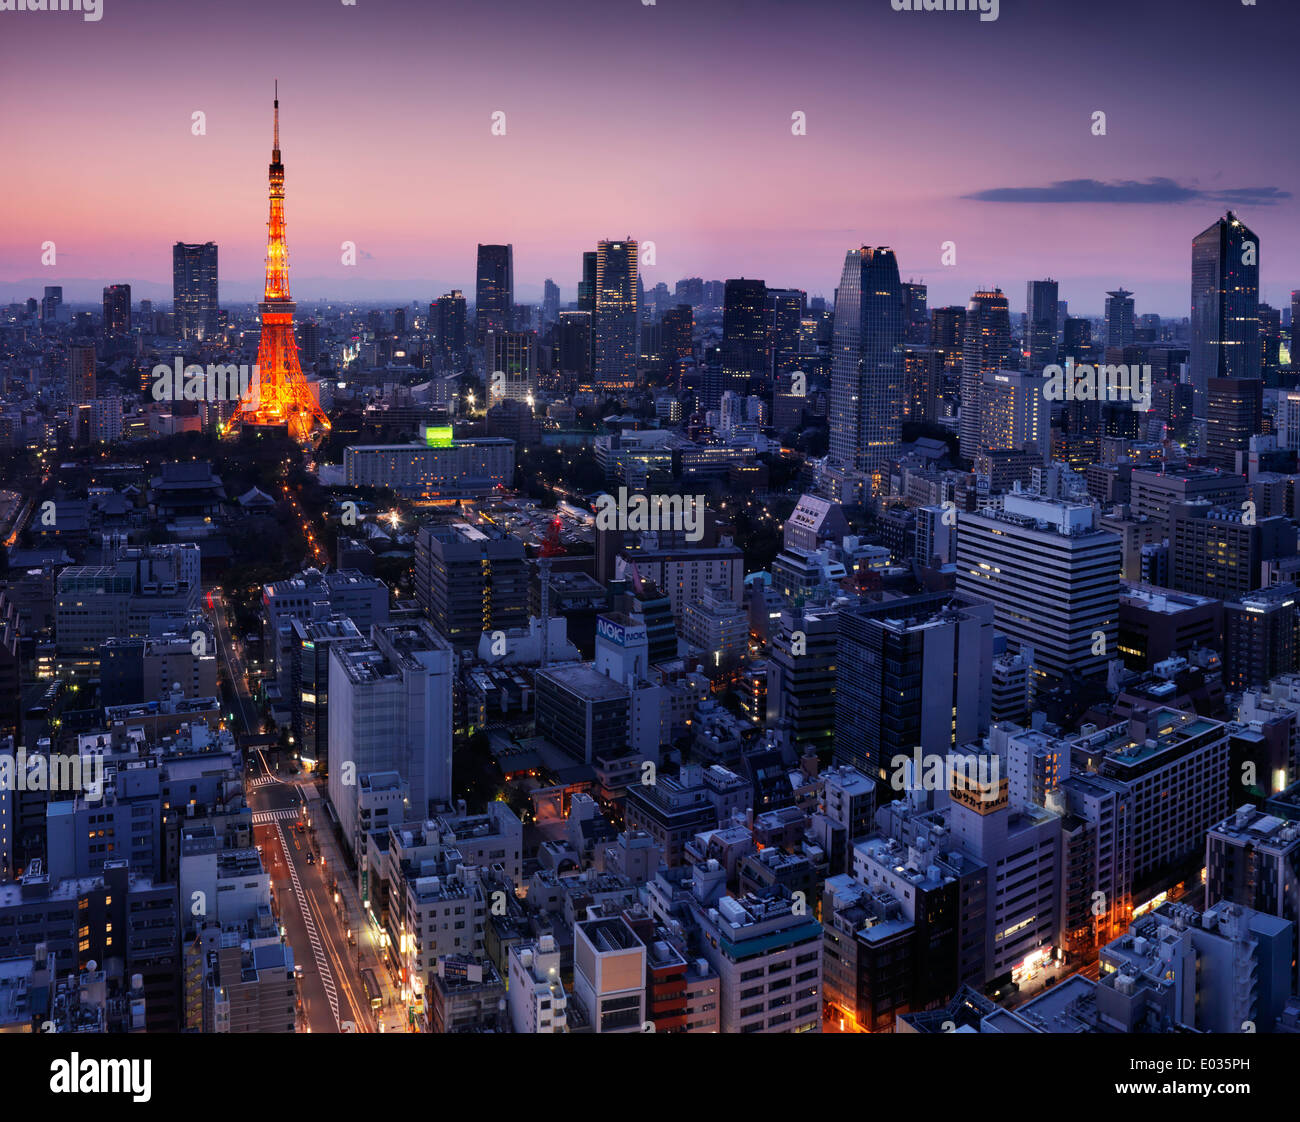 License available at MaximImages.com - Tokyo tower at night over purple twilight sky. Minato, Tokyo, Japan. Stock Photo